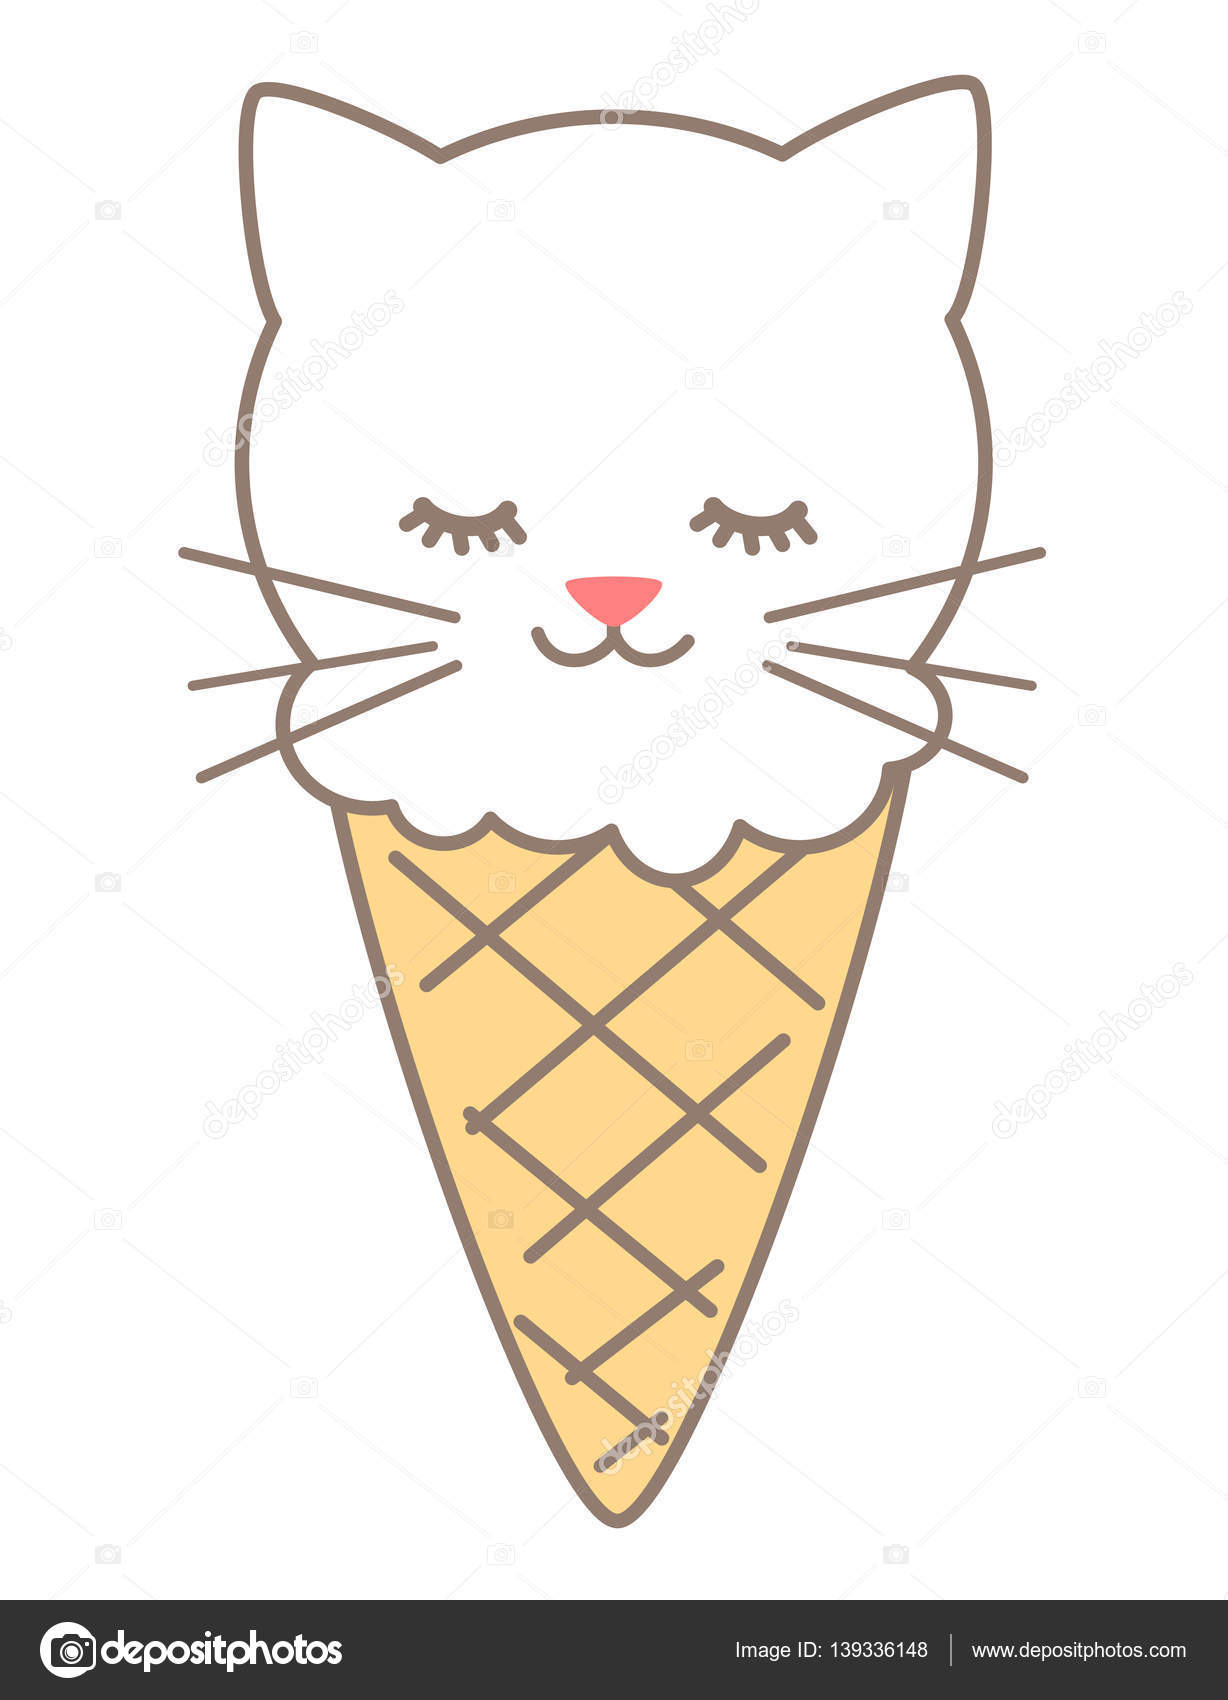 Cute Ice Cream Cone Drawing at GetDrawings | Free download